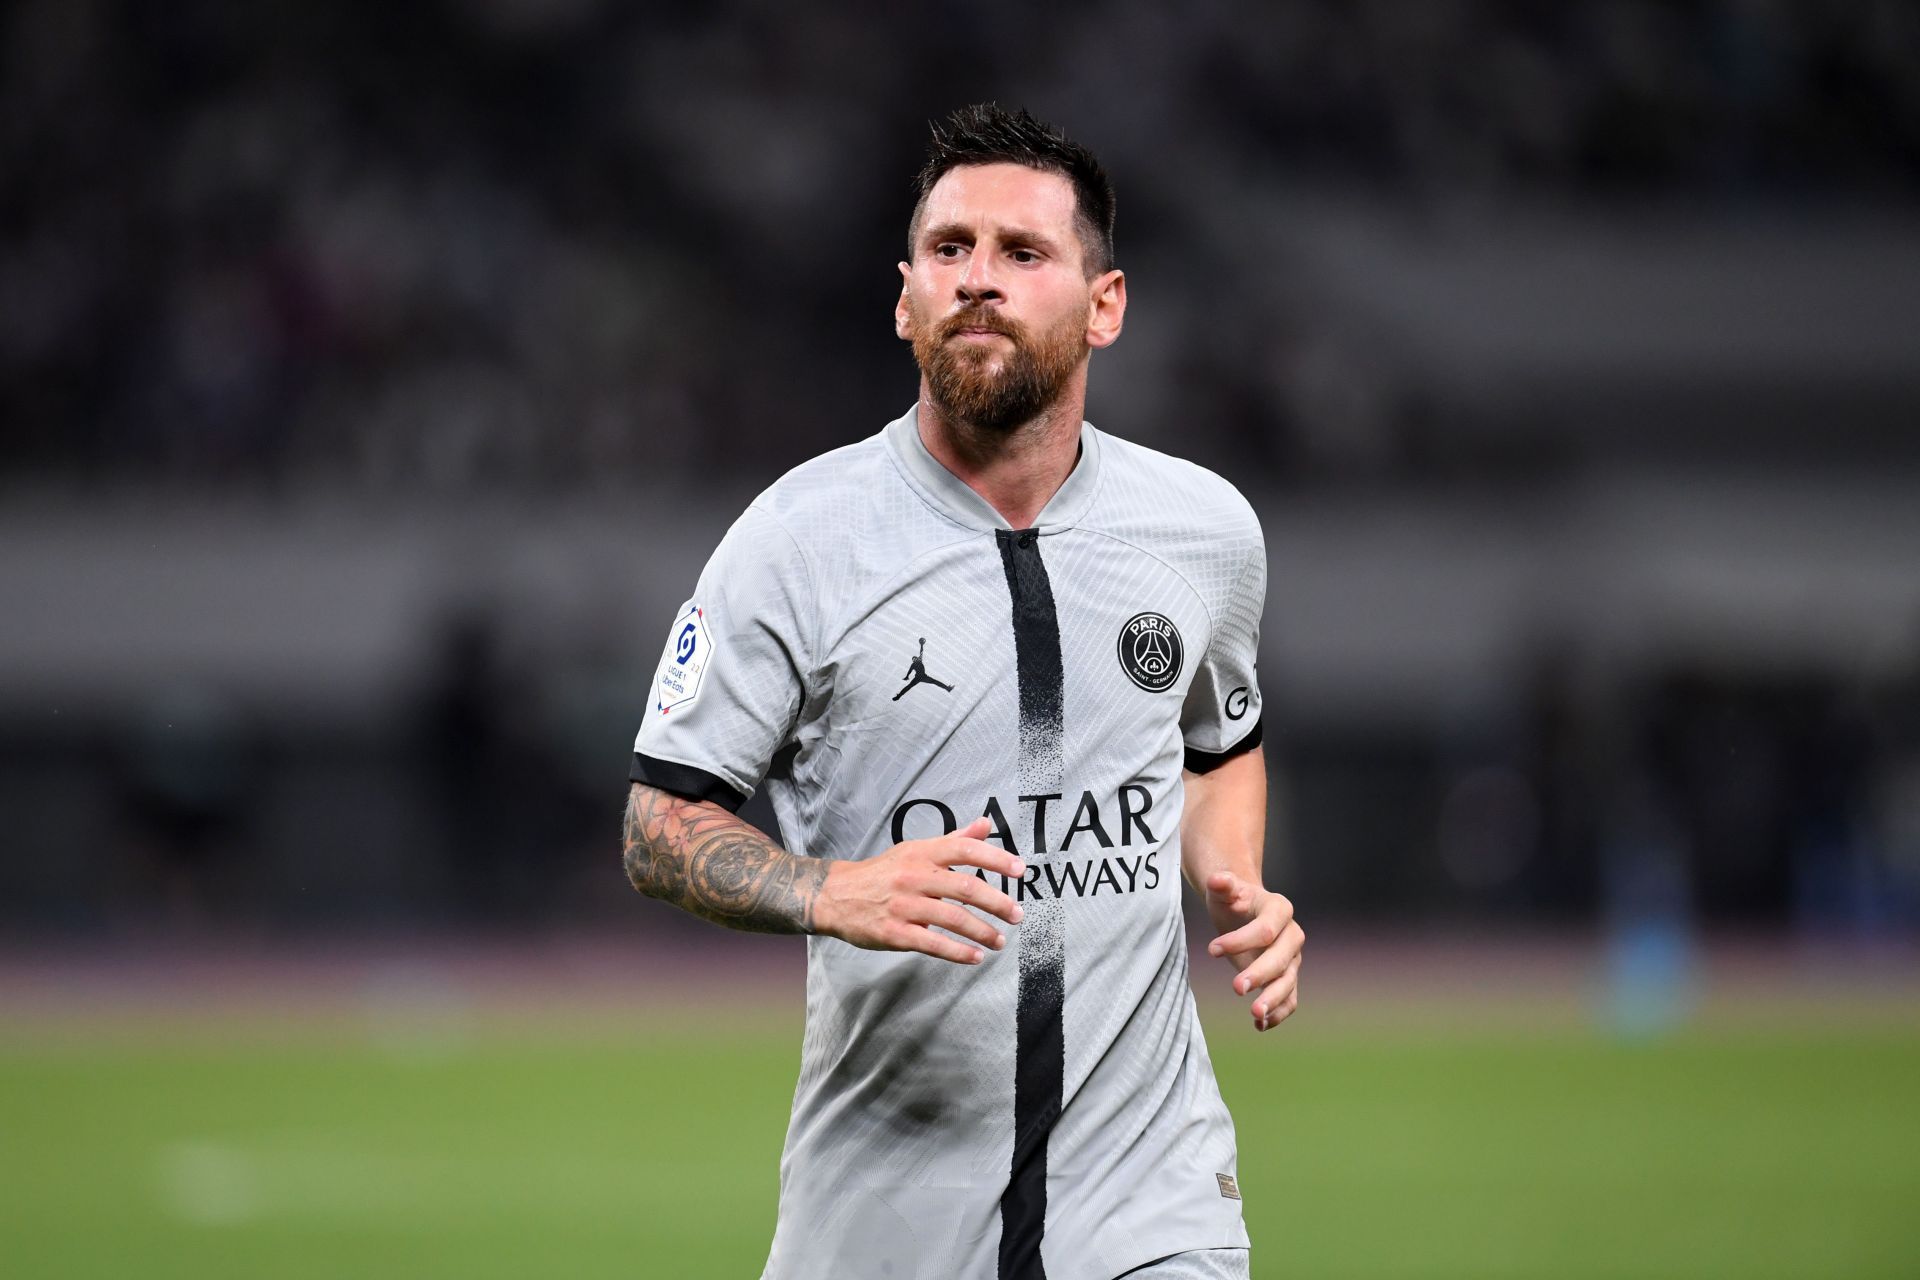 Messi is off to a good start in Paris this season.